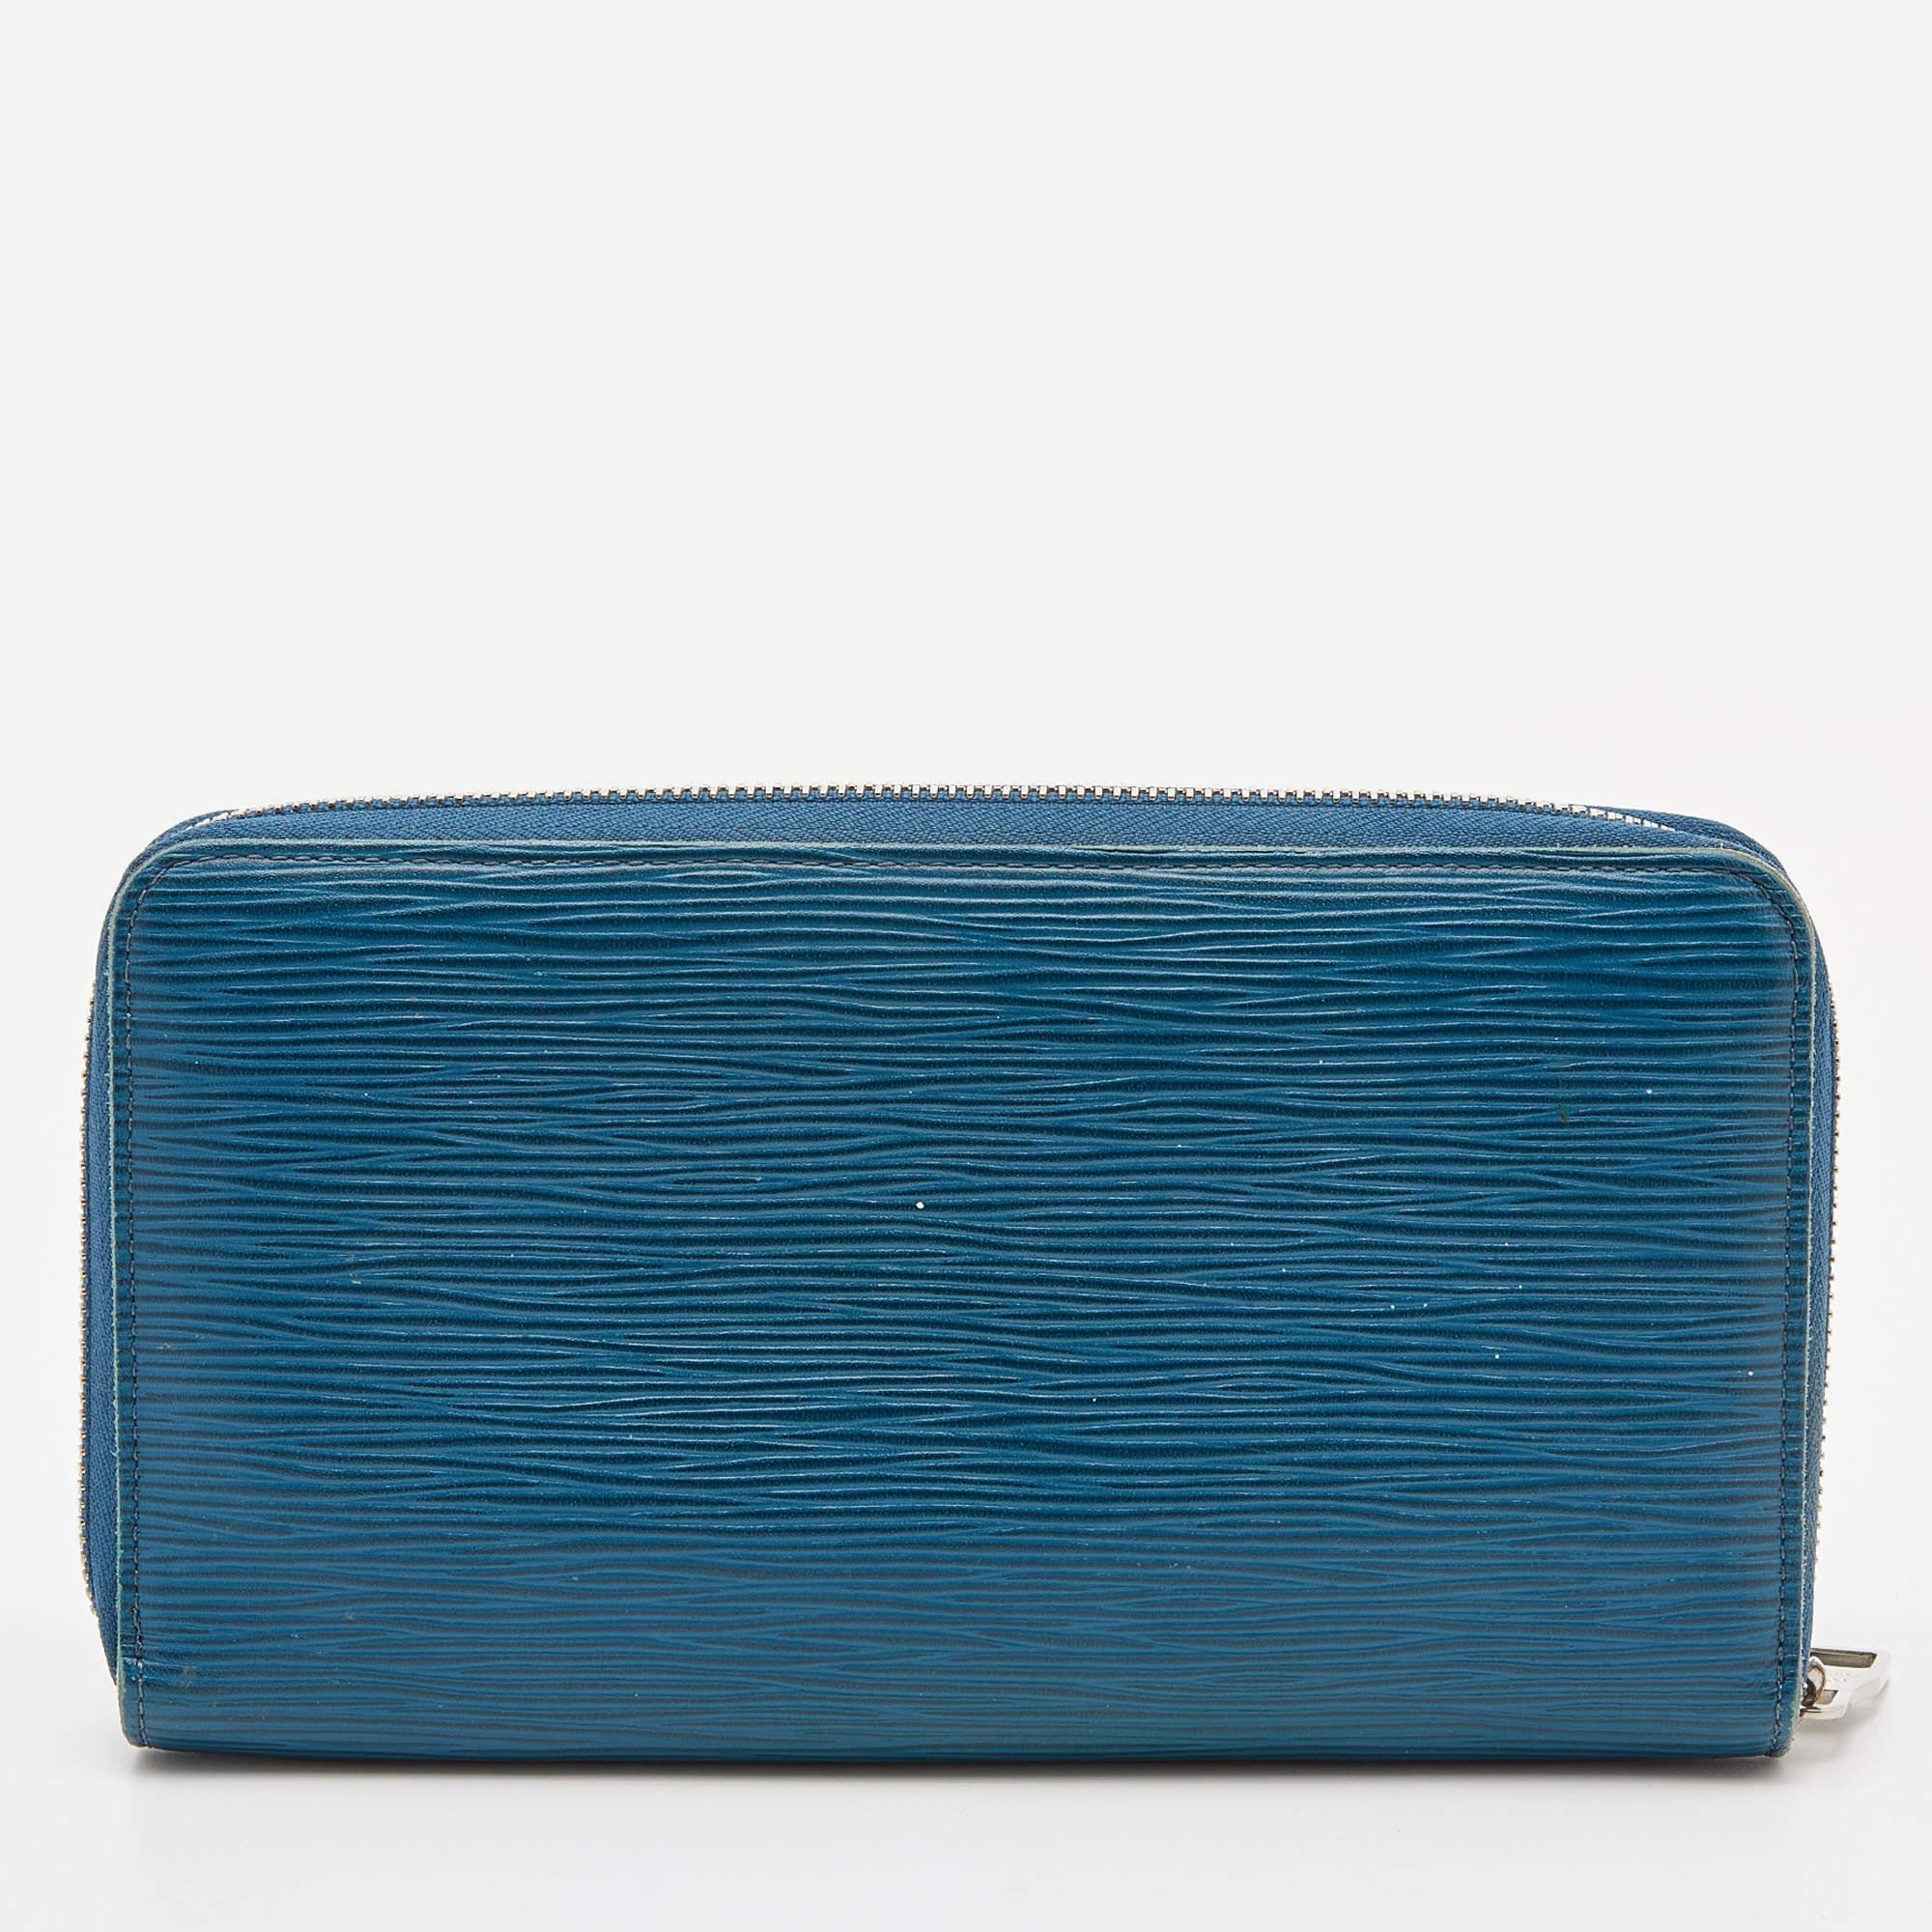 This Louis Vuitton Zippy wallet is conveniently designed for everyday use. Crafted from Cyan Epi leather , it is paired with a zip-around closure and silver-tone hardware. The compartmentalized interior of the wallet will store your card and cash in